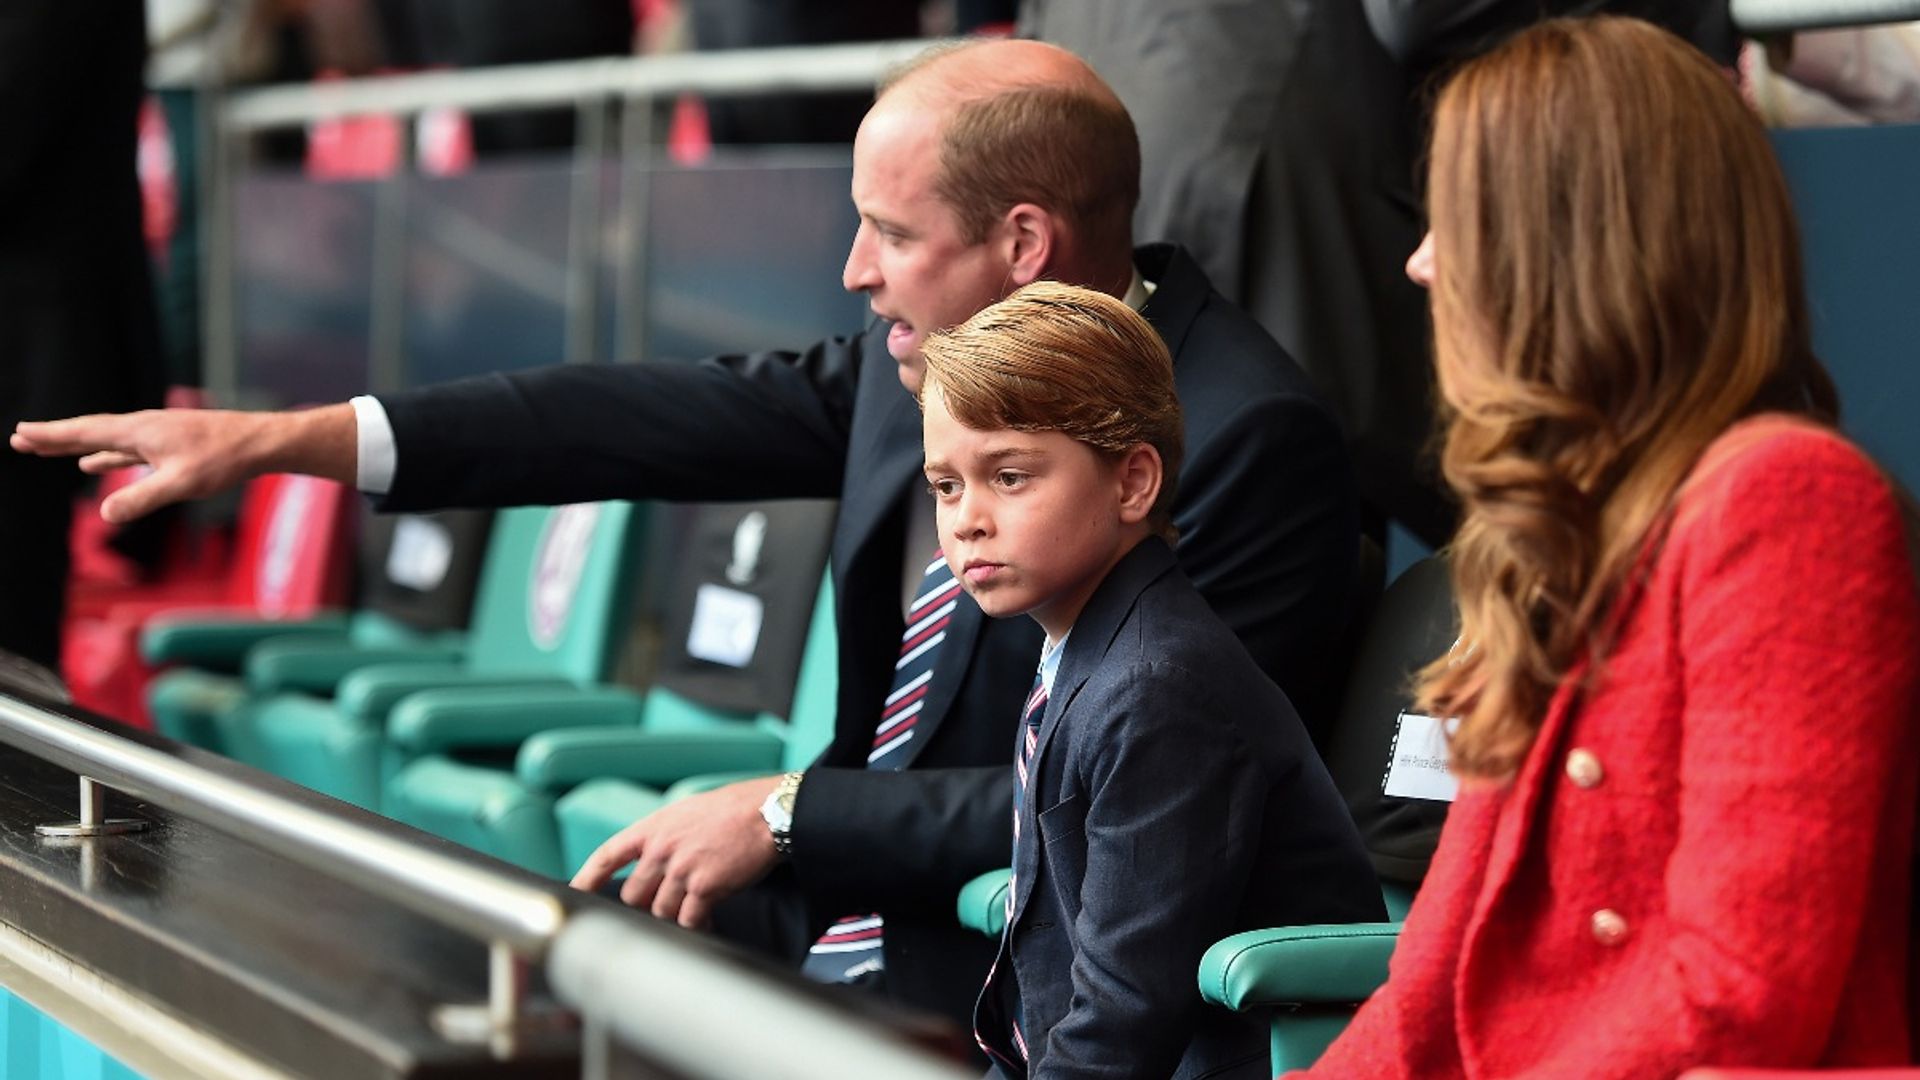 Prince George has trial day at new school - report